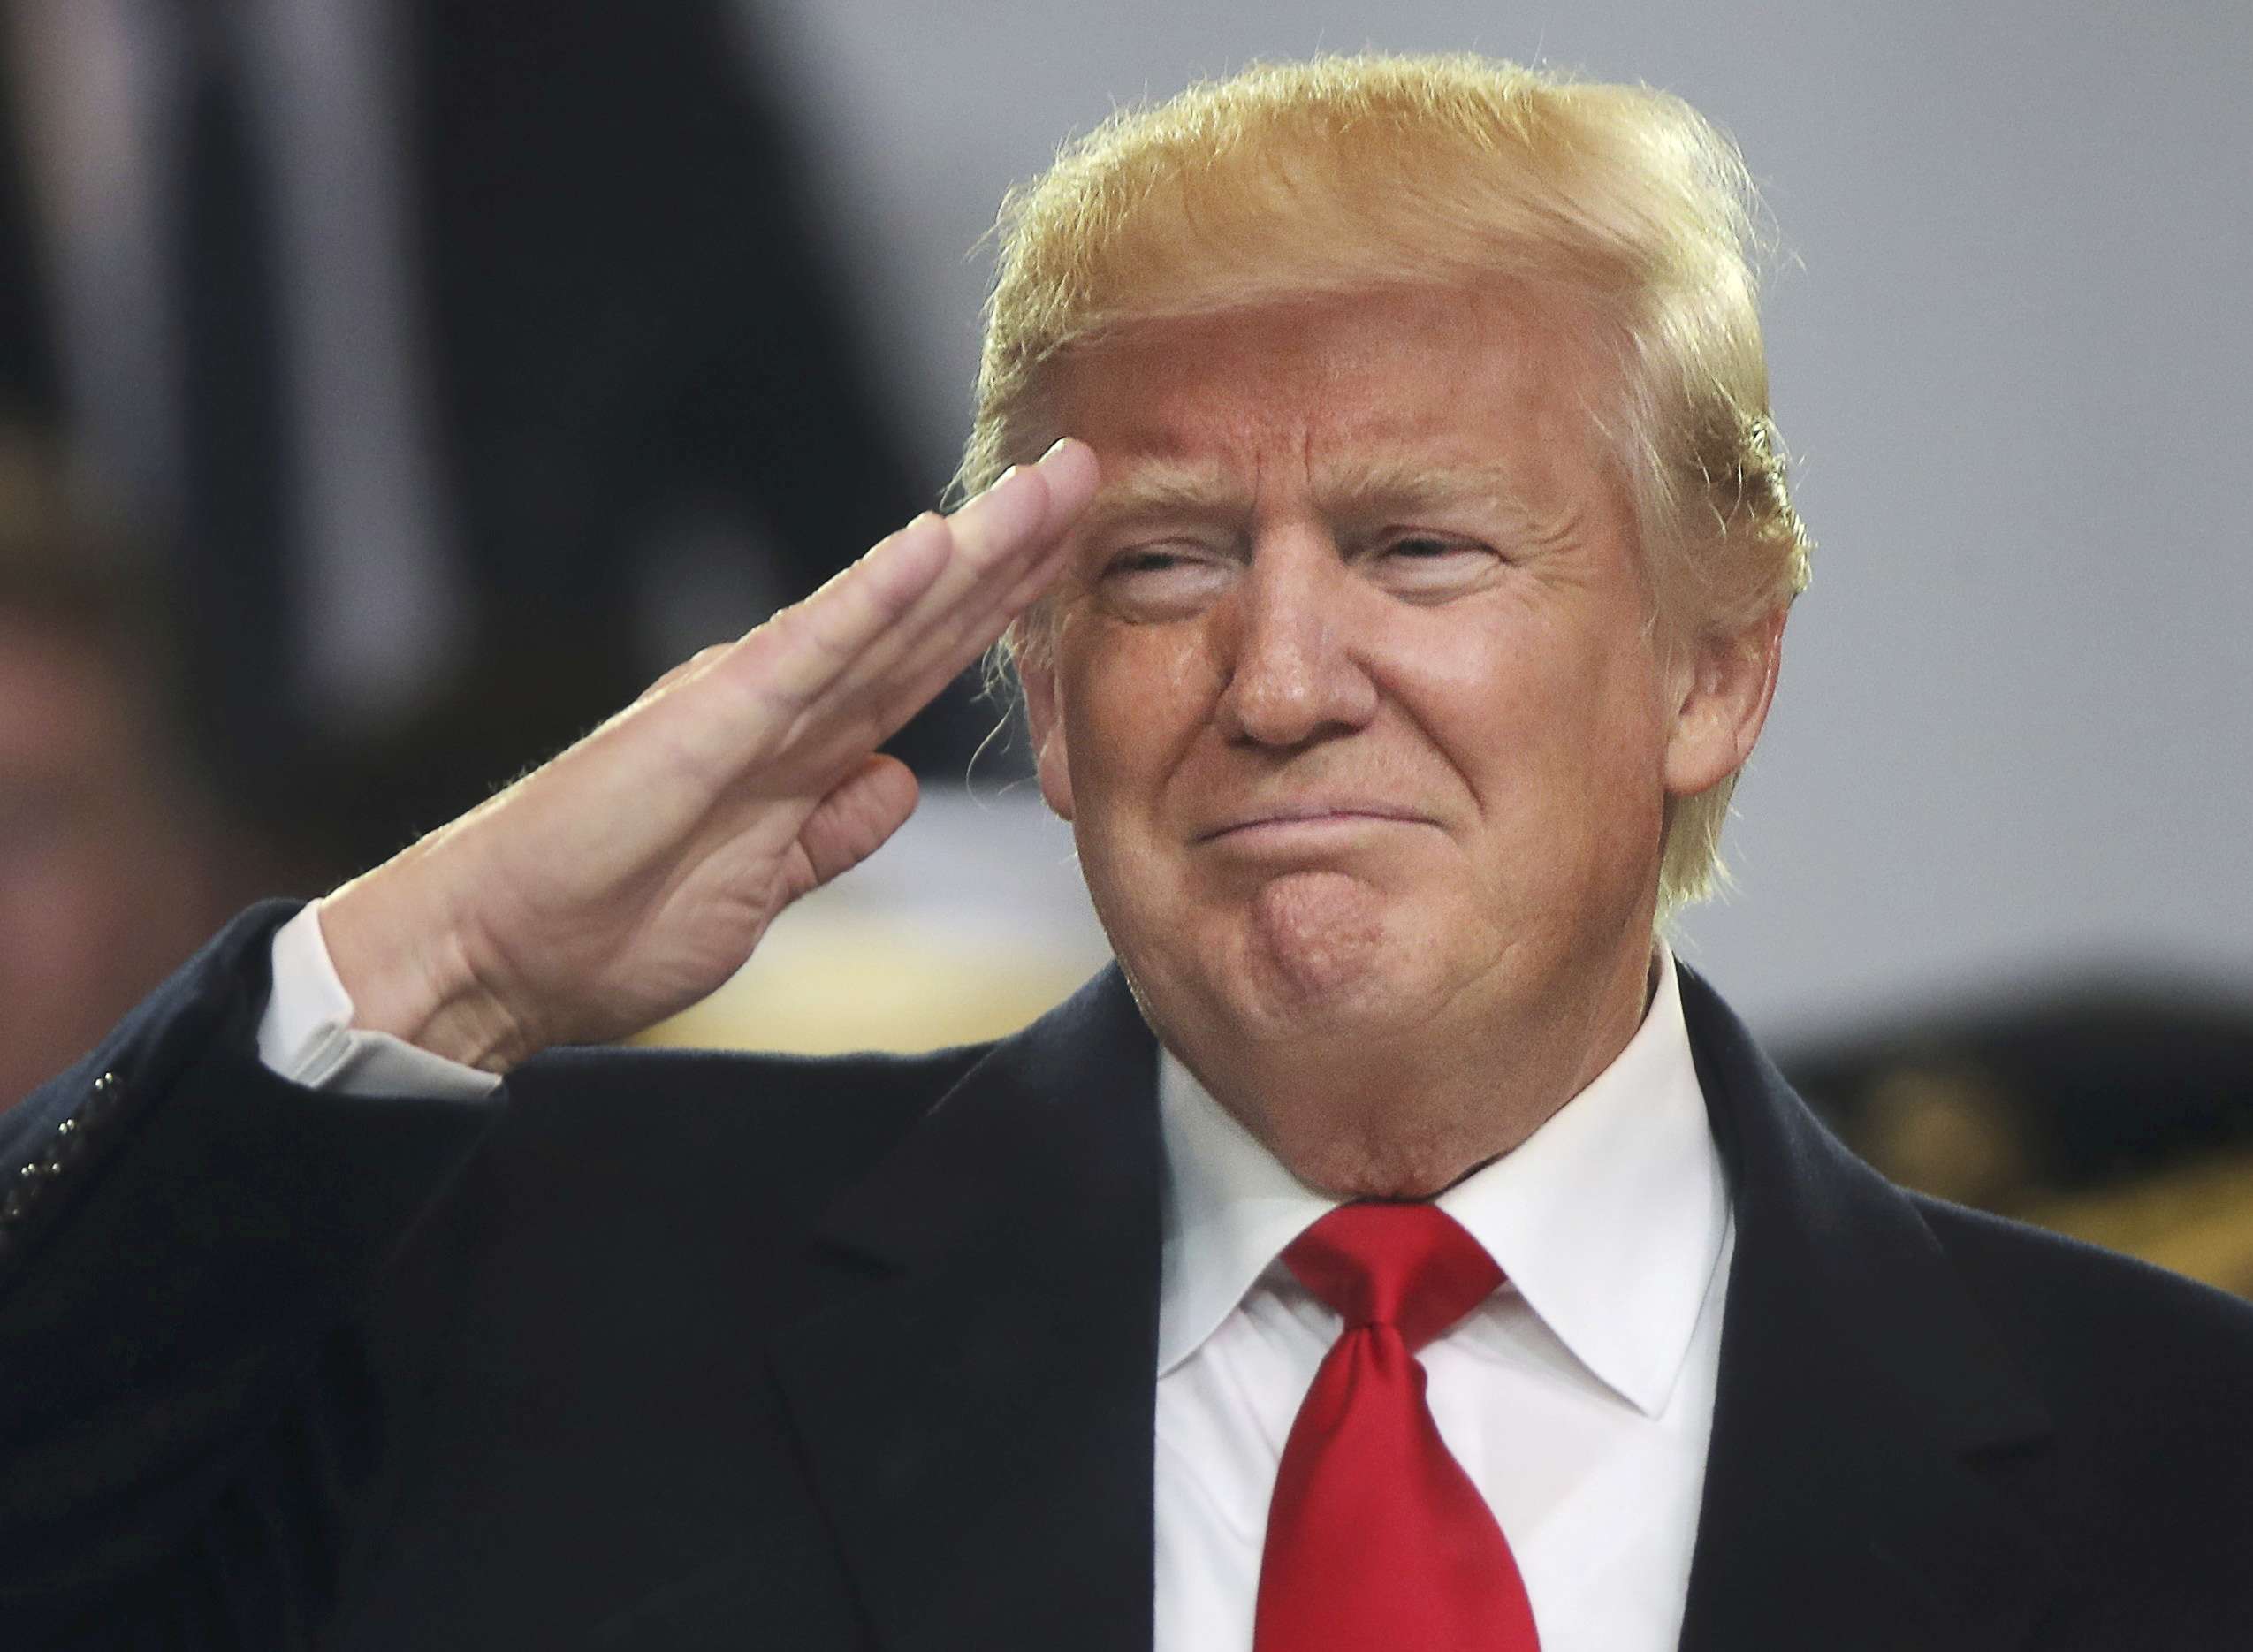 US President Donald Trump salutes participants during the inaugural parade in Washington on Friday. Photo: Reuters